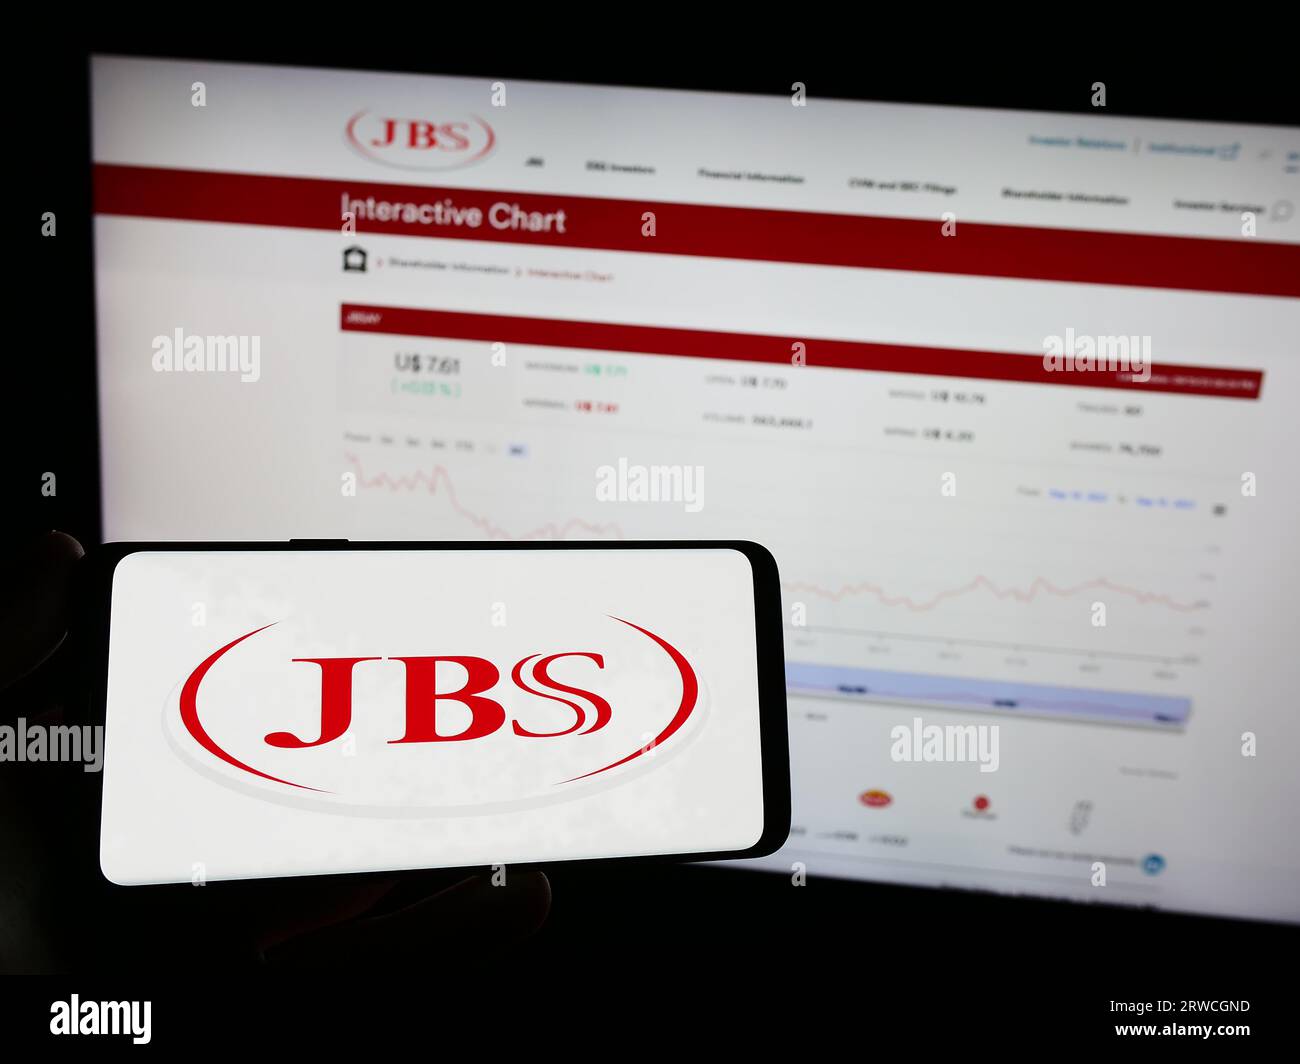 Person holding mobile phone with logo of Brazilian mear processing company JBS S.A. on screen in front of web page. Focus on phone display. Stock Photo